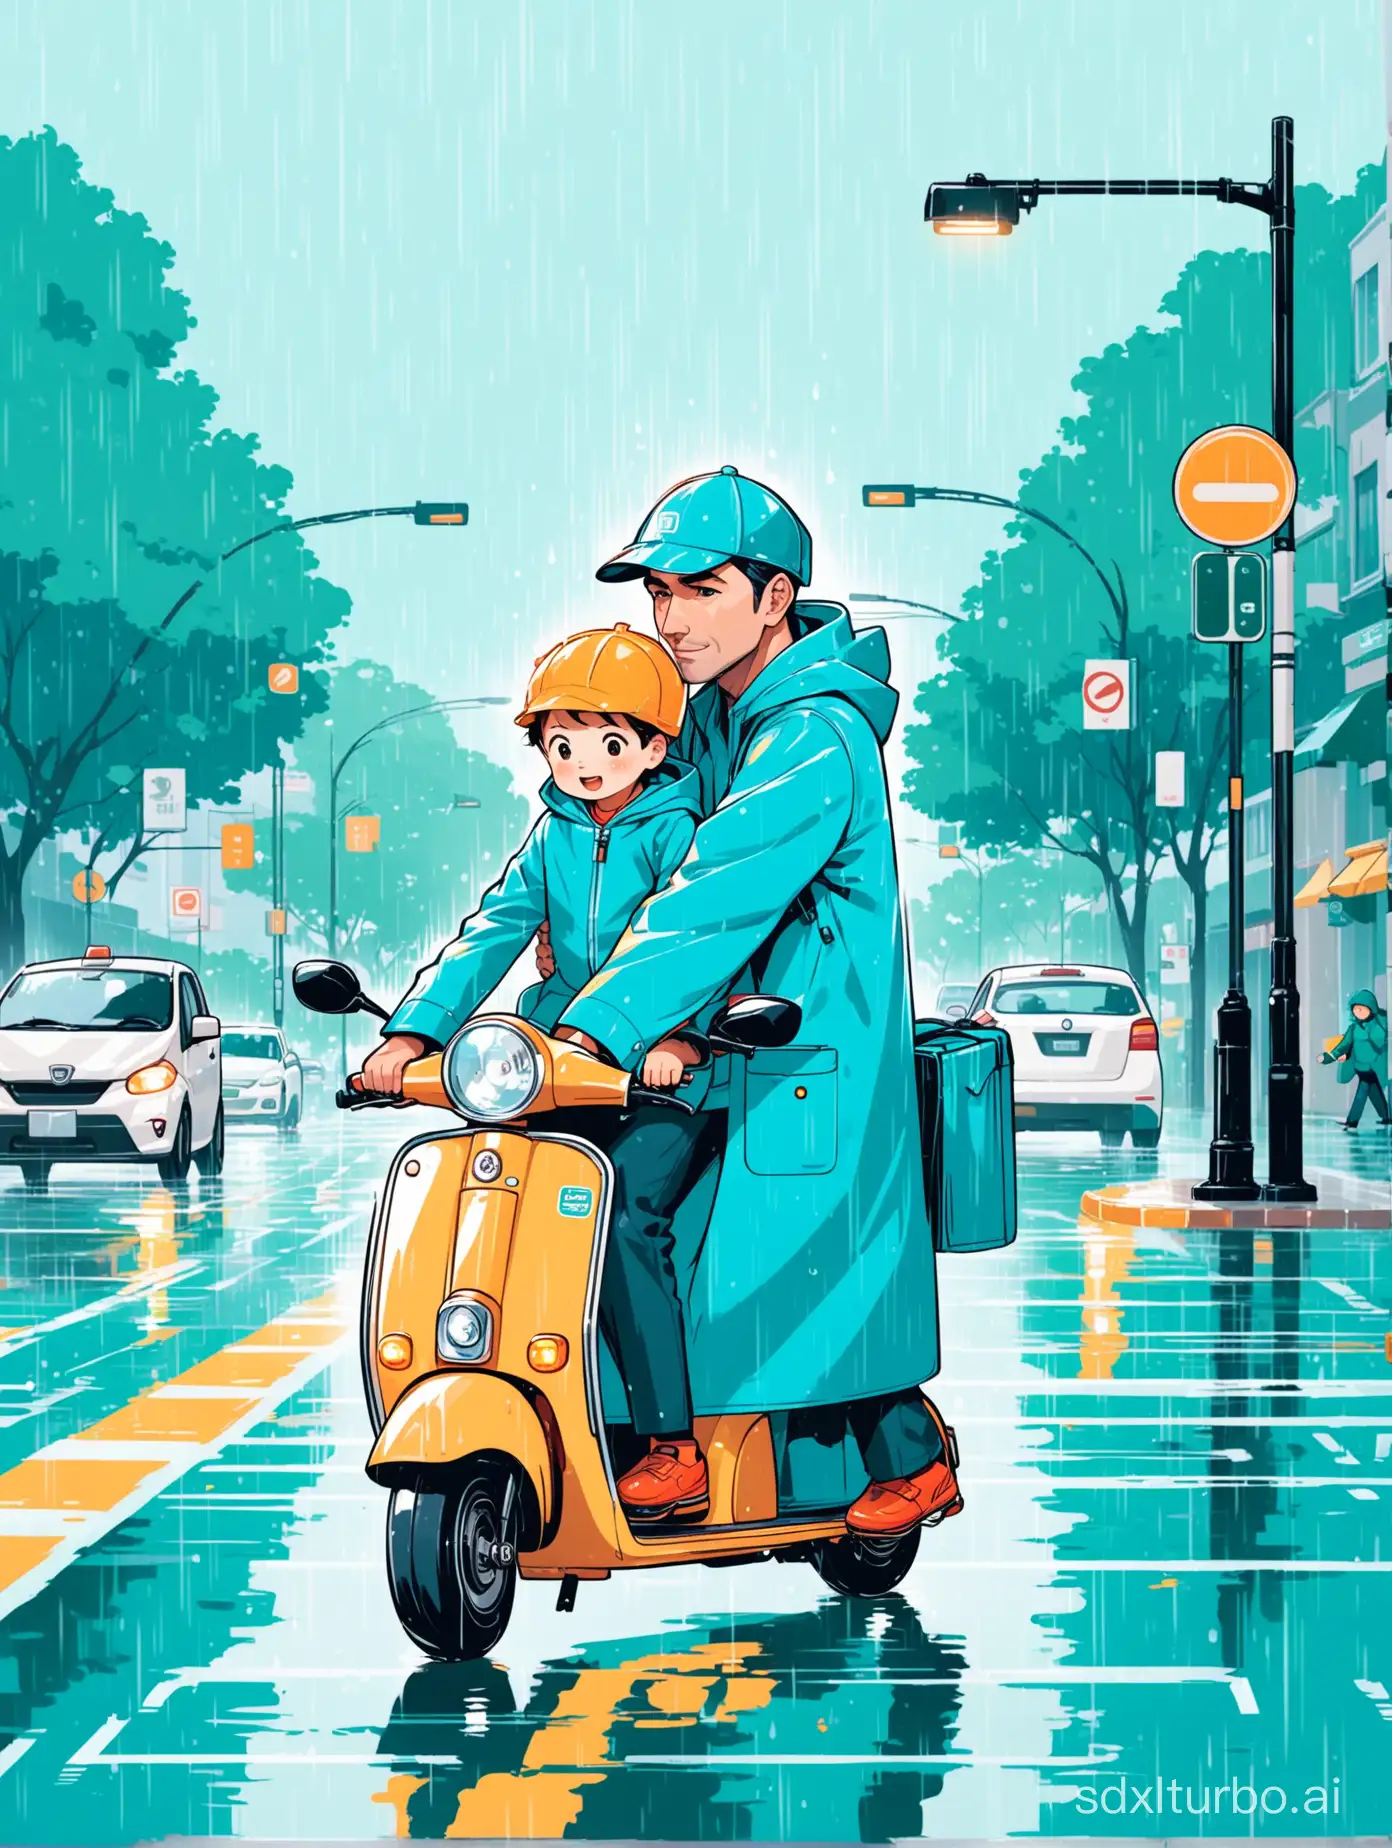 Cute flat illustration style, bright and soft colors, at the intersection on a rainy day, a deliveryman dad rides an electric scooter across the street, and the scooter carries a 3-year-old boy in a blue raincoat.